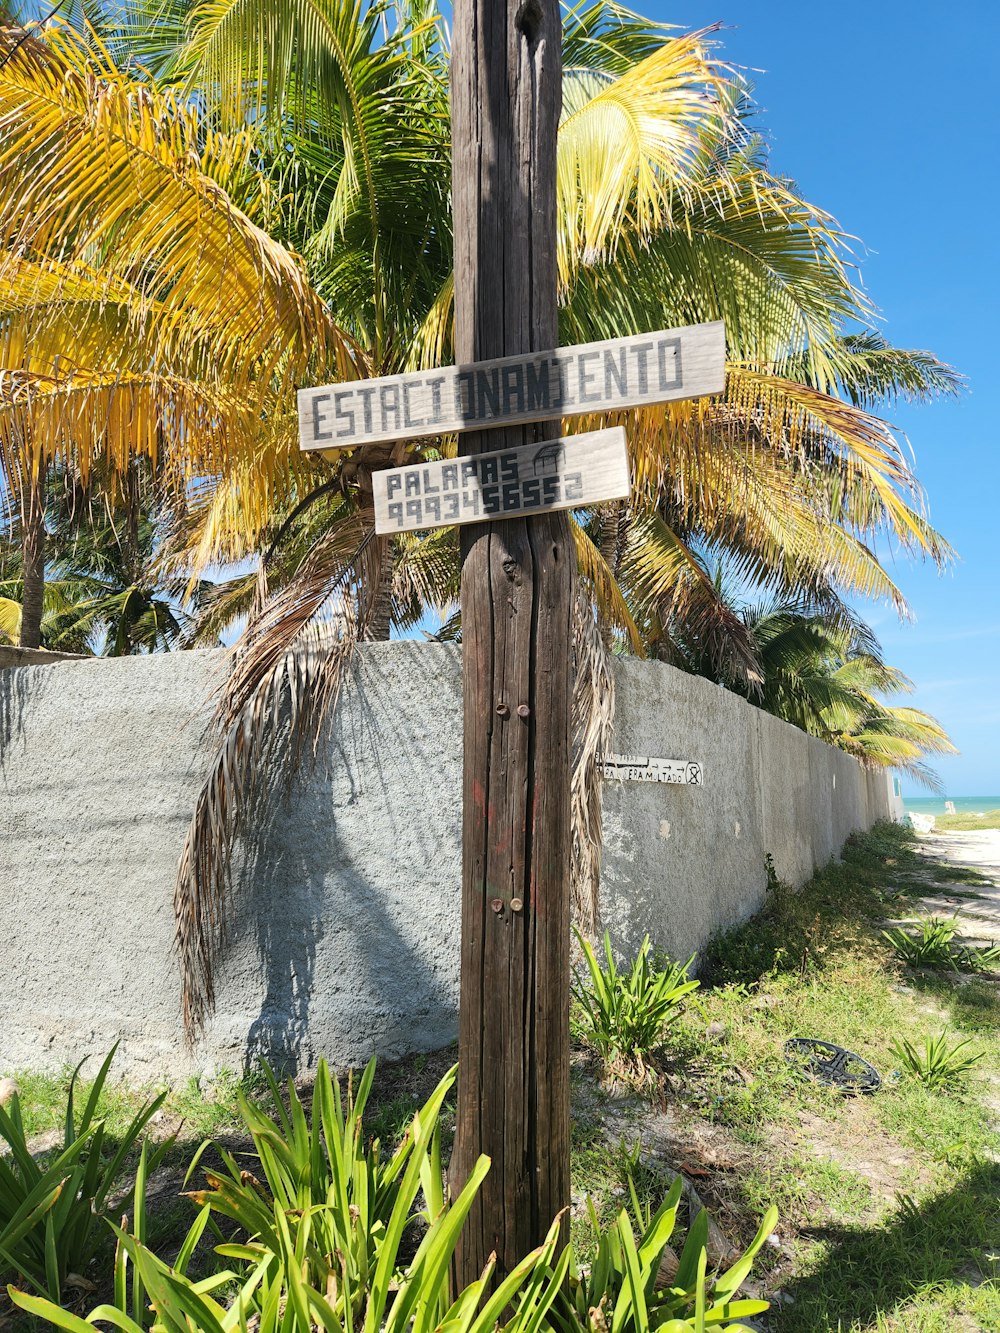 a wooden pole with a street sign on it